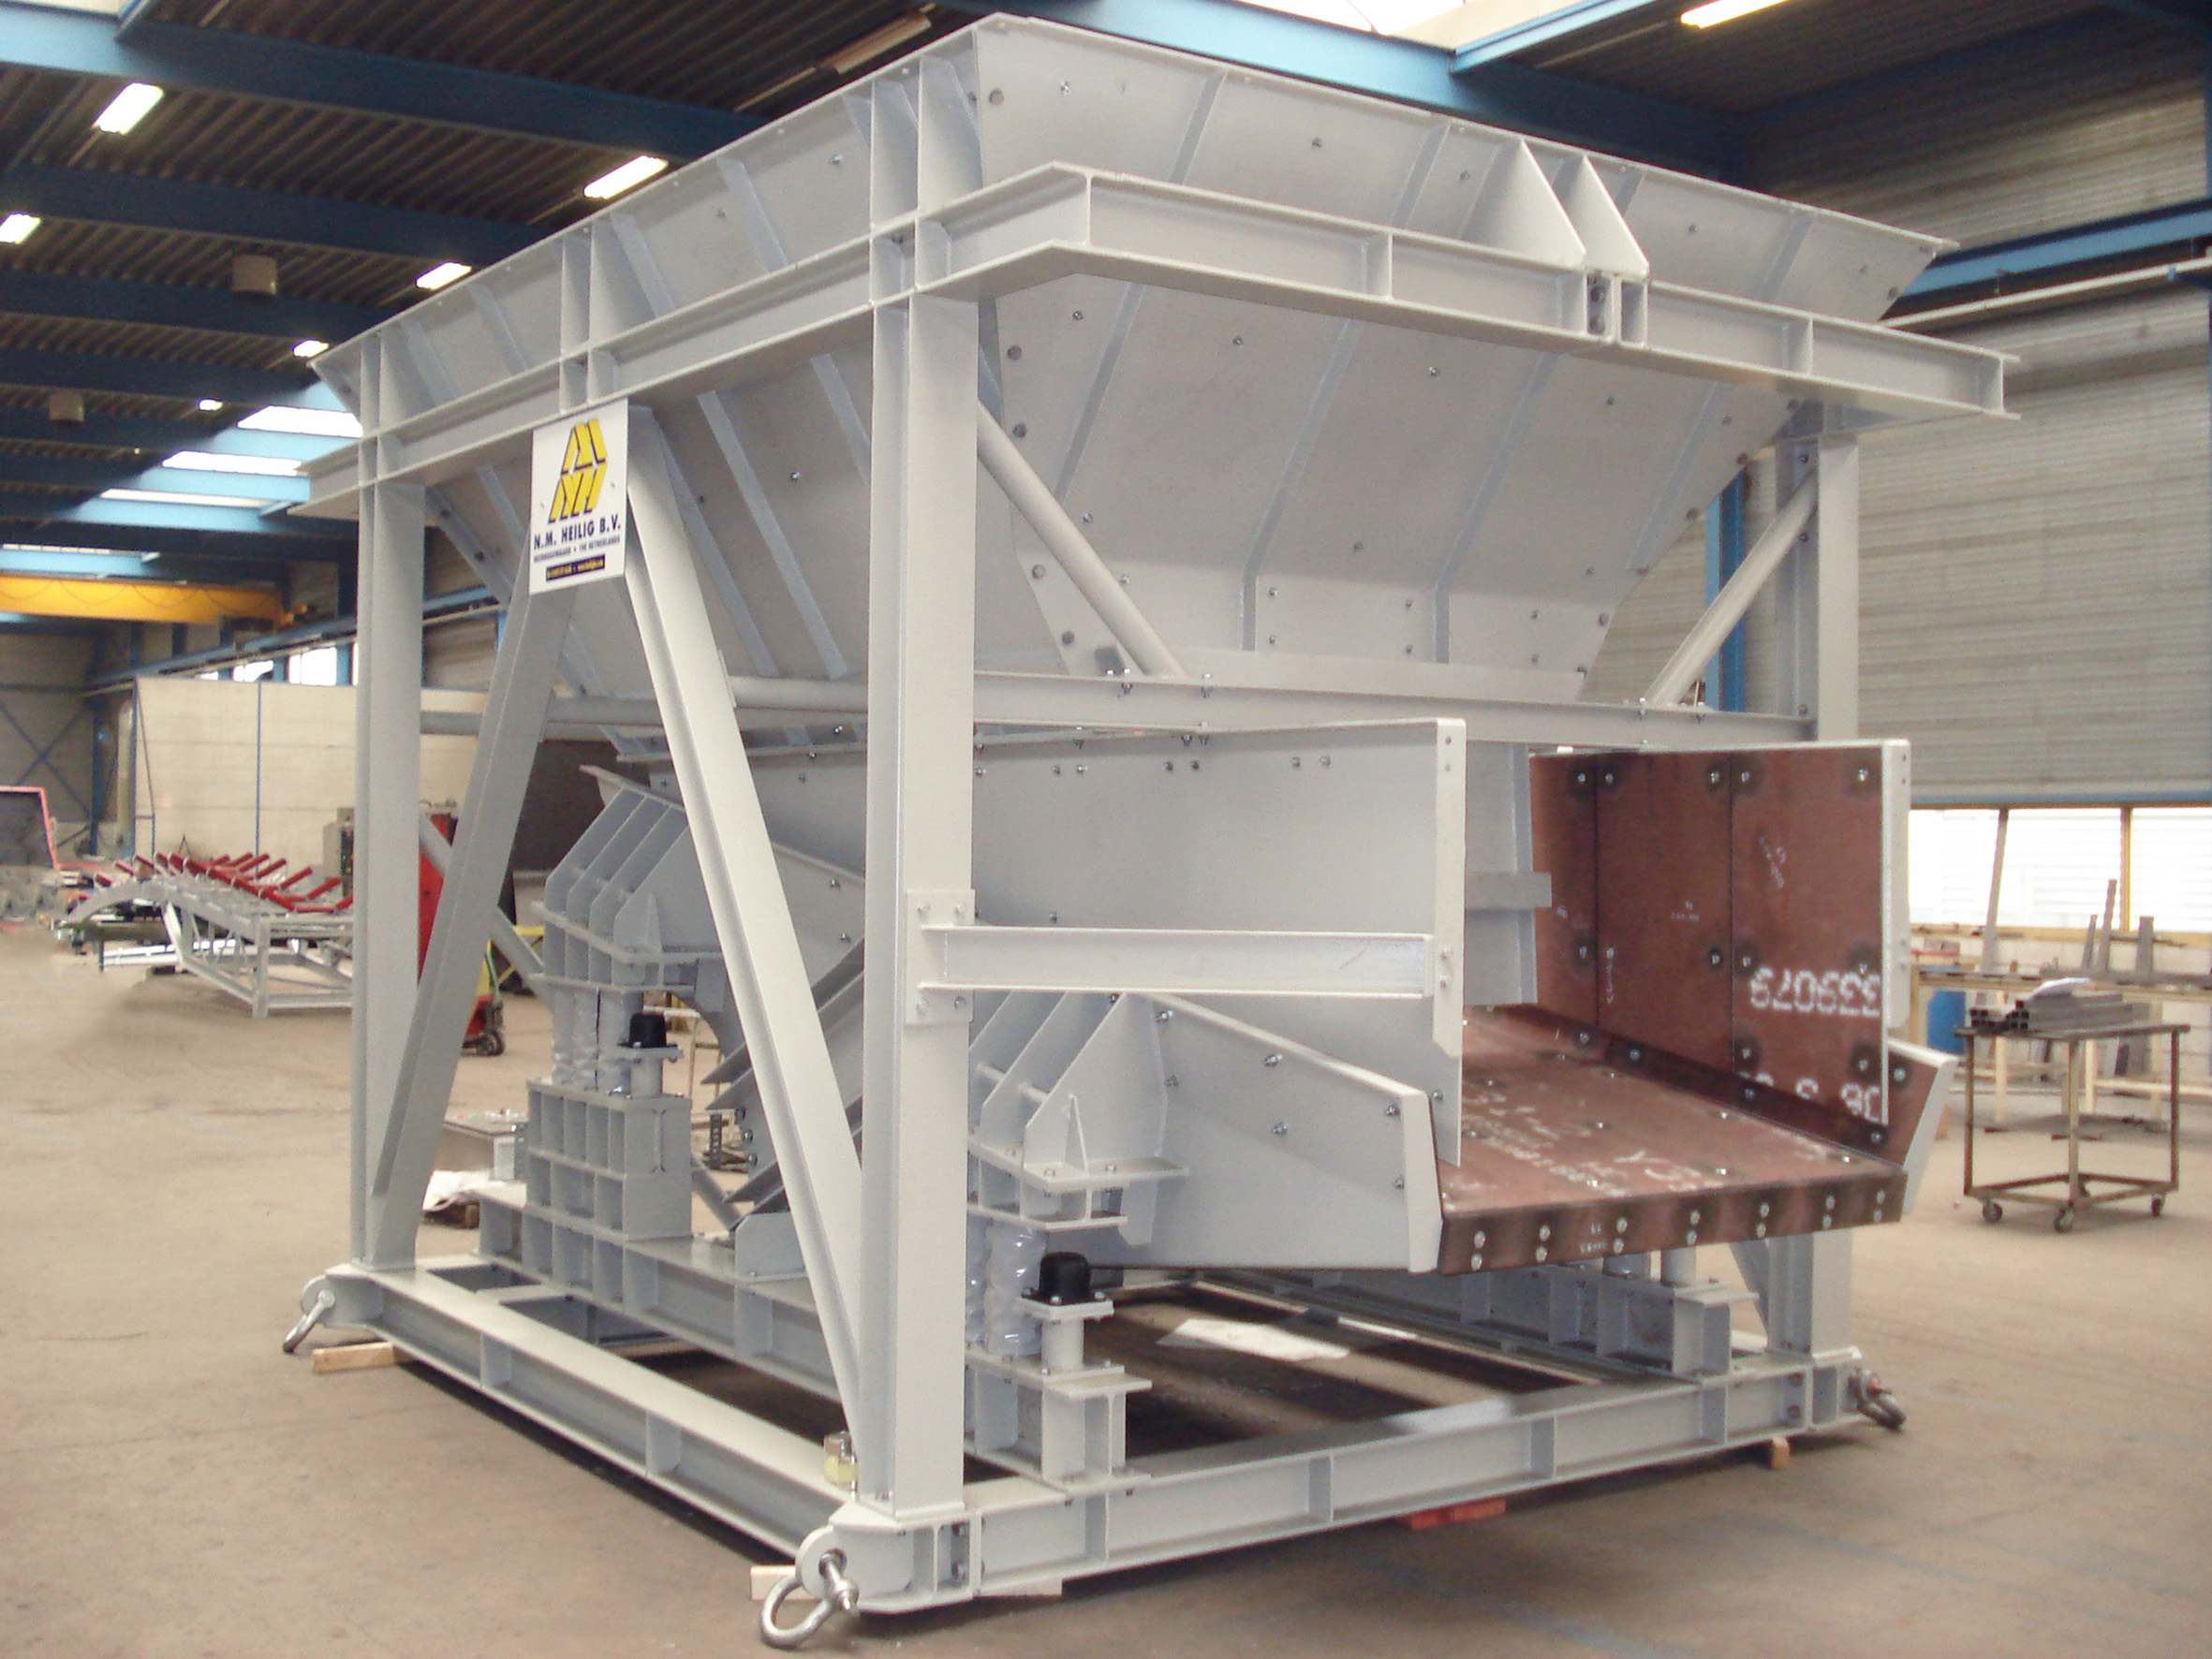 Bunker and vibratory feeder